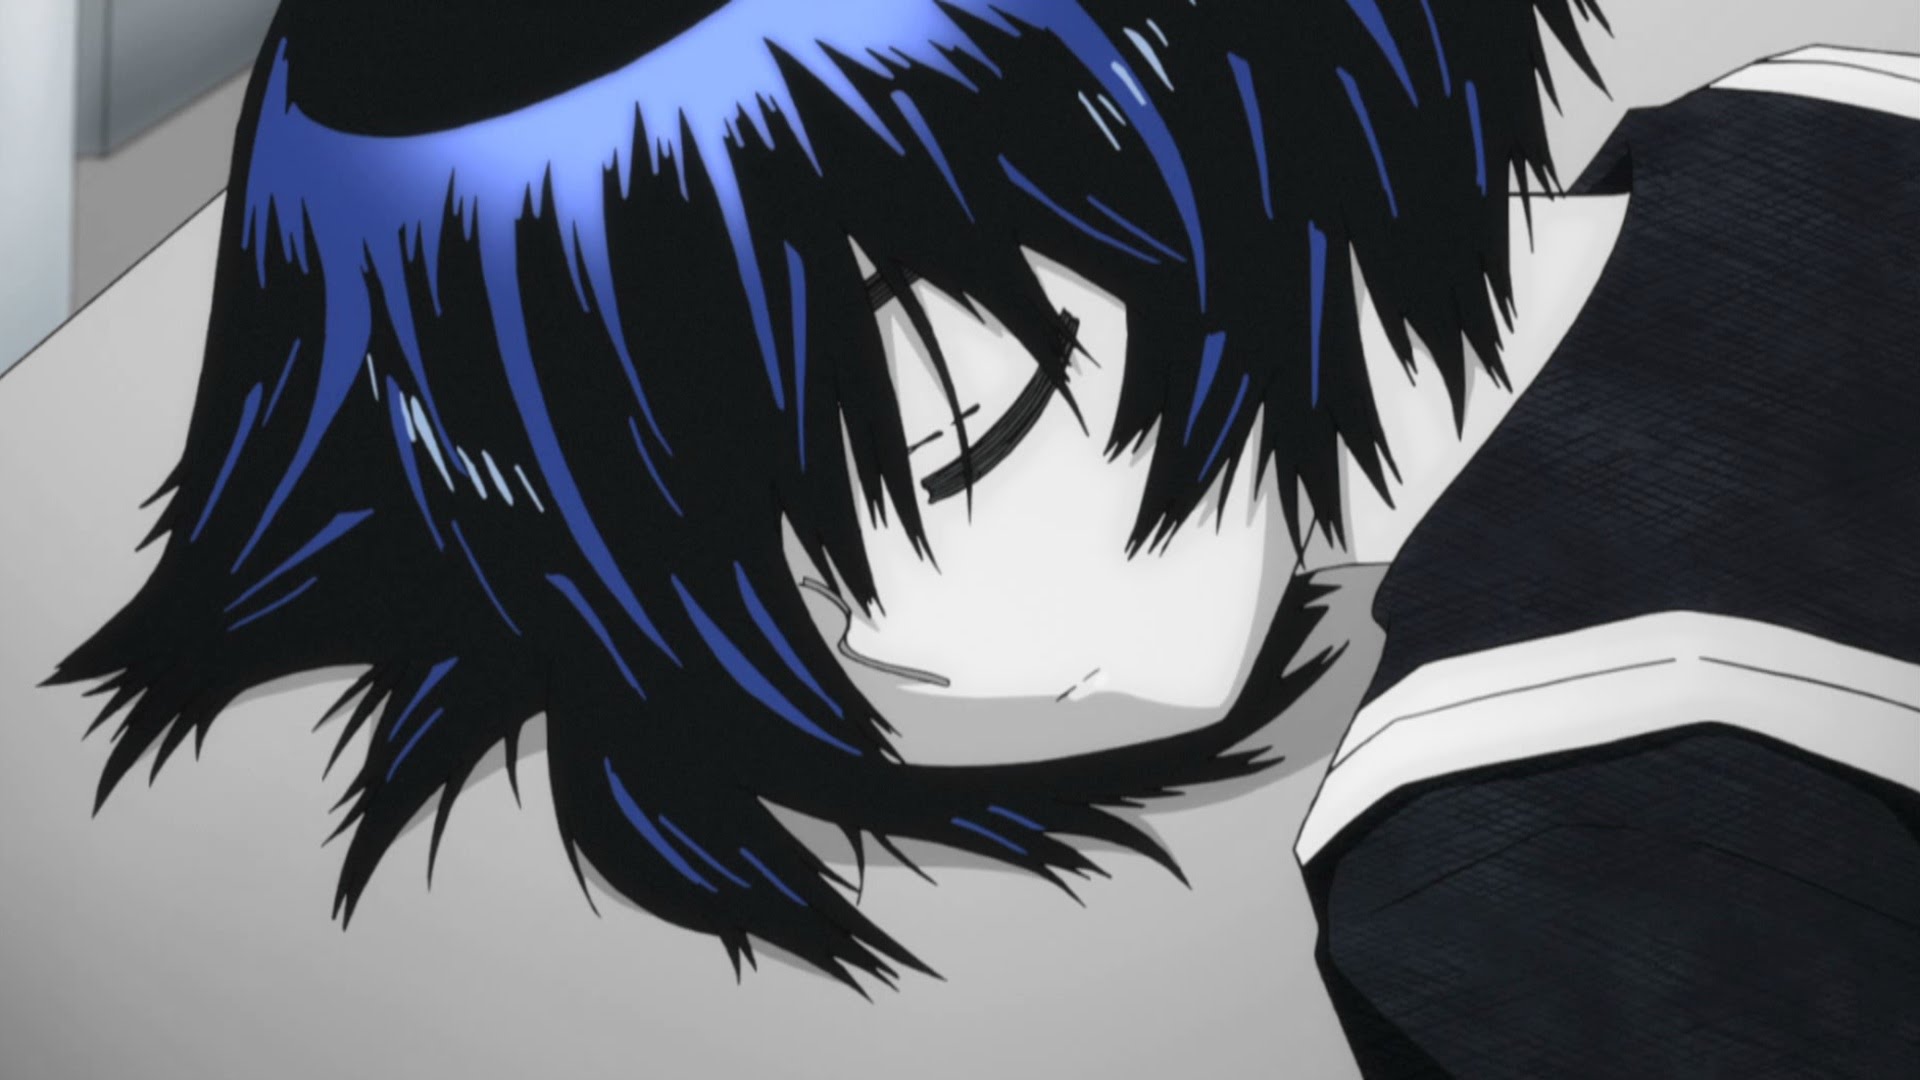 Mysterious Girlfriend X Backgrounds, Compatible - PC, Mobile, Gadgets| 1920x1080 px